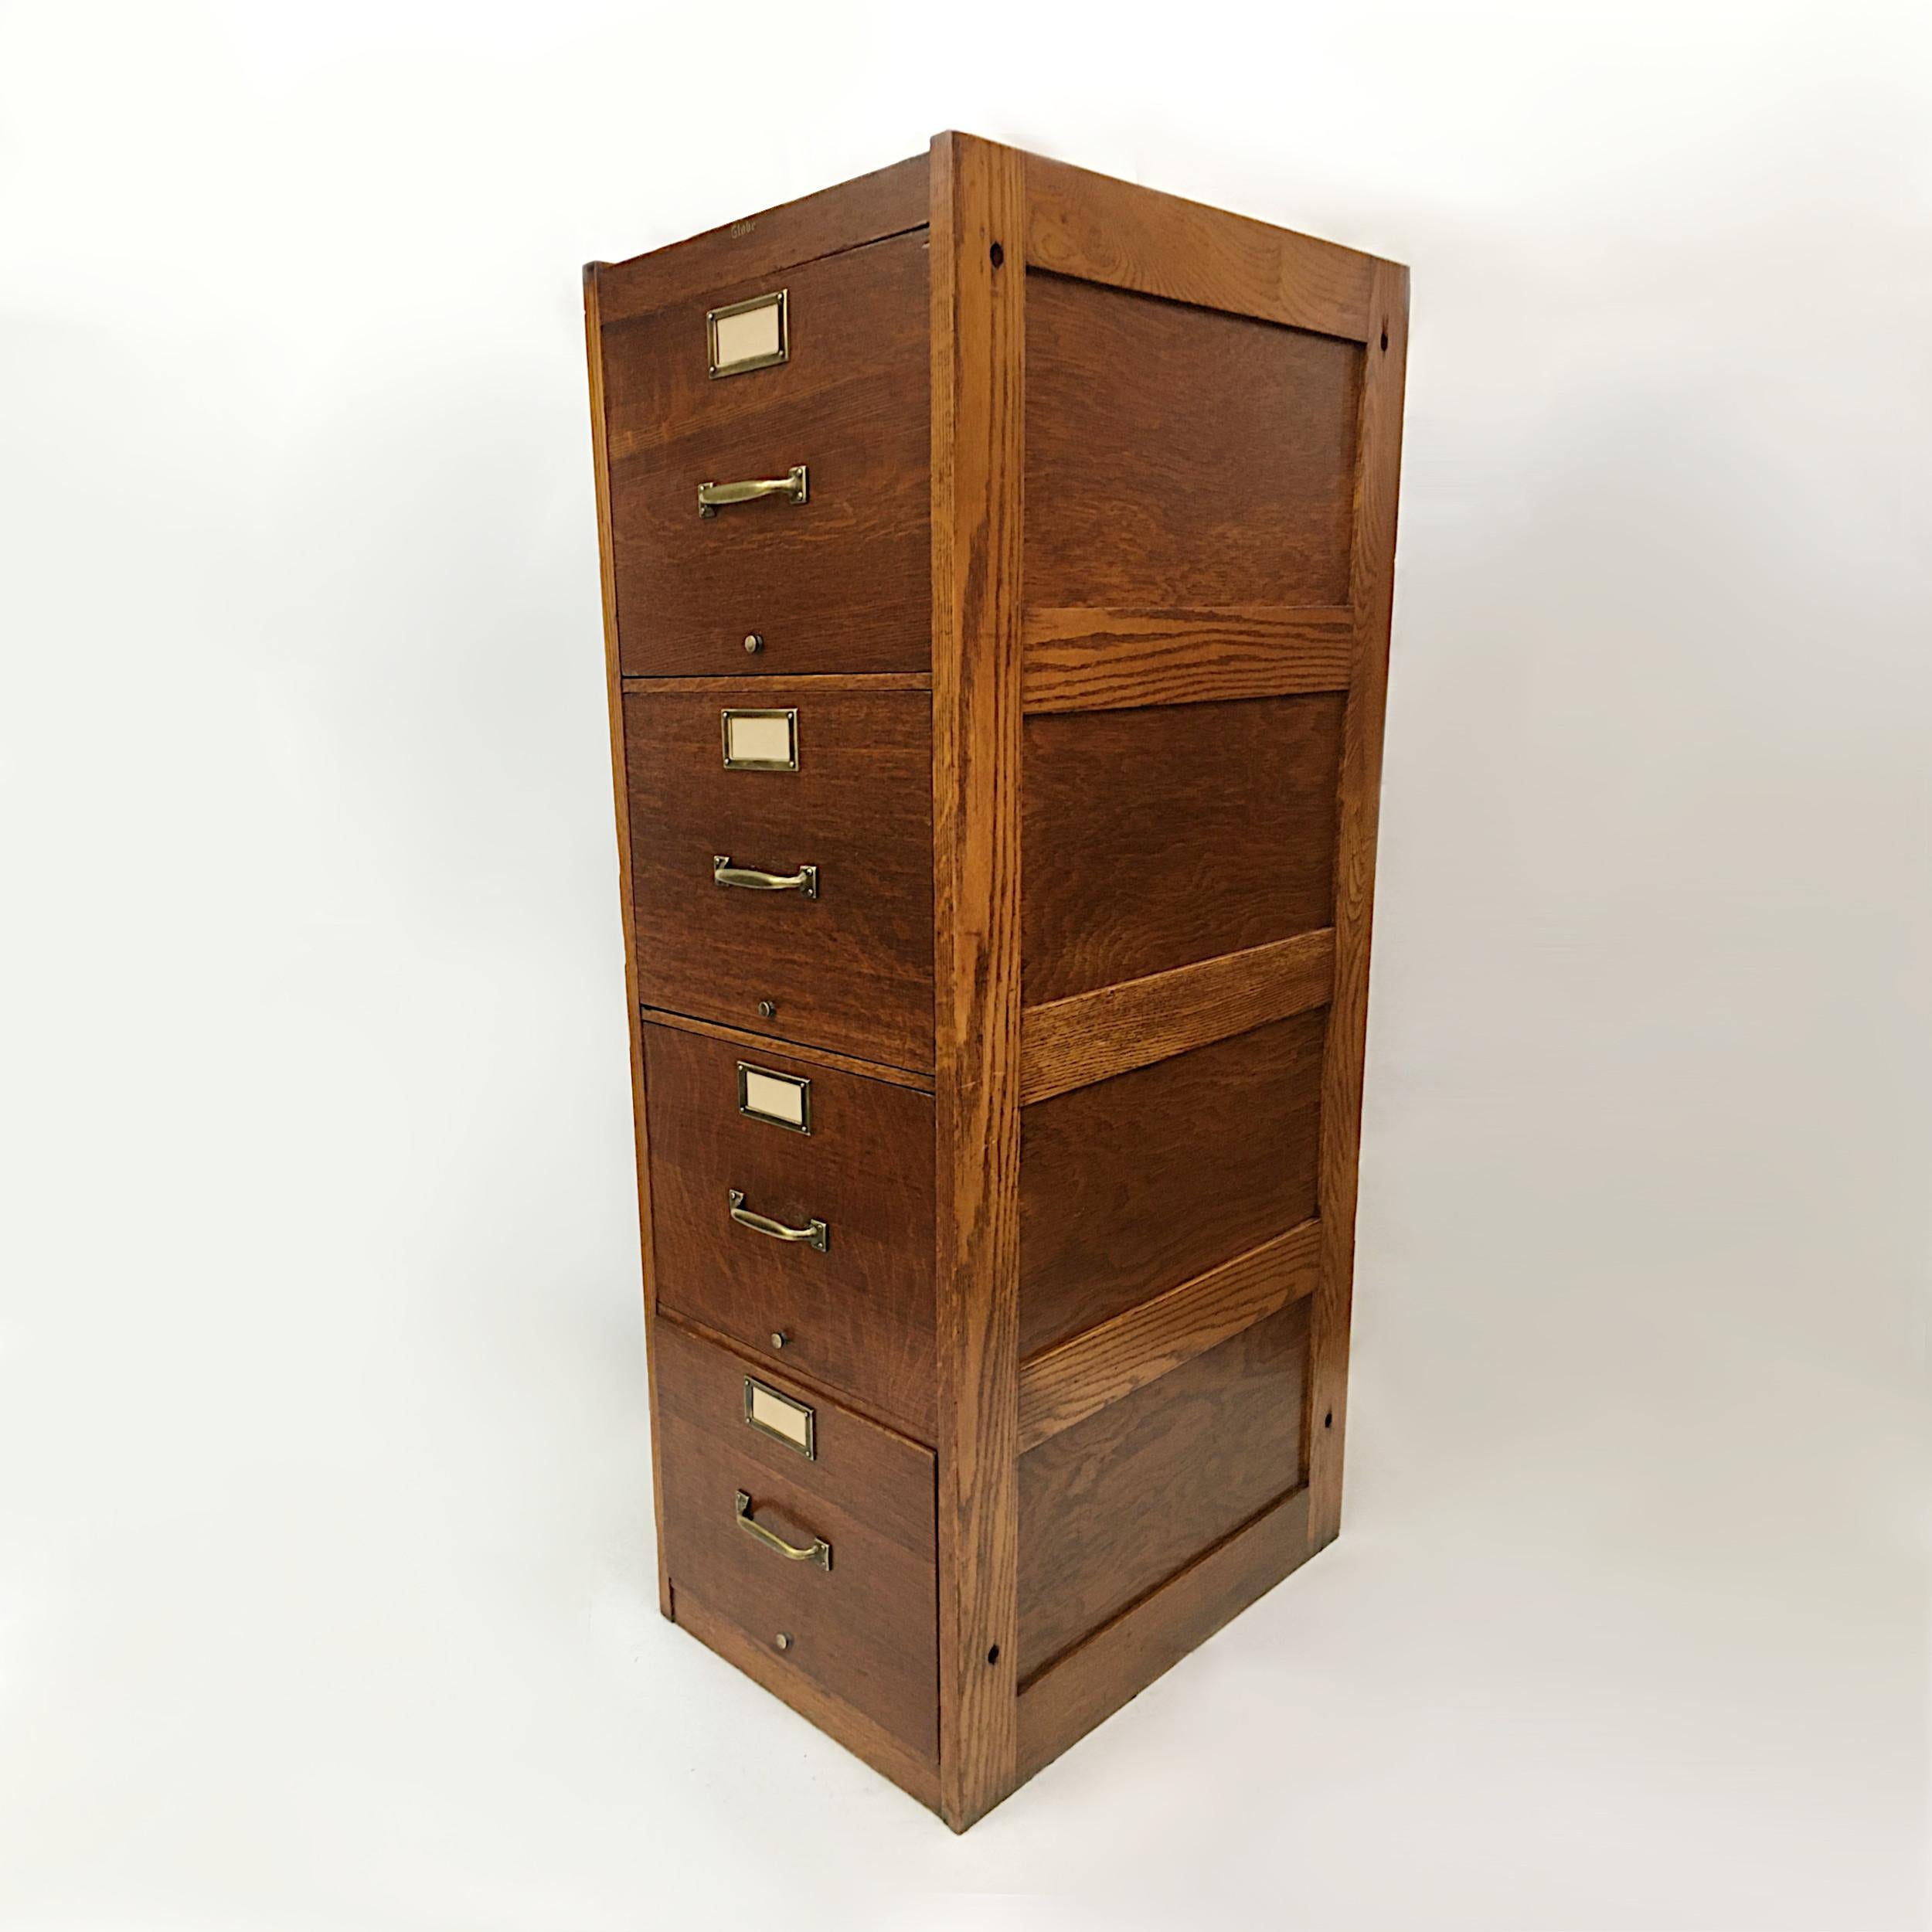 Very nice 1930s file cabinet by Globe Wernicke. Cabinet features solid oak construction with solid brass hardware and paneled sides. This cabinet has a wonderful mix of materials giving it a great Industrial look all in a compact size that can be